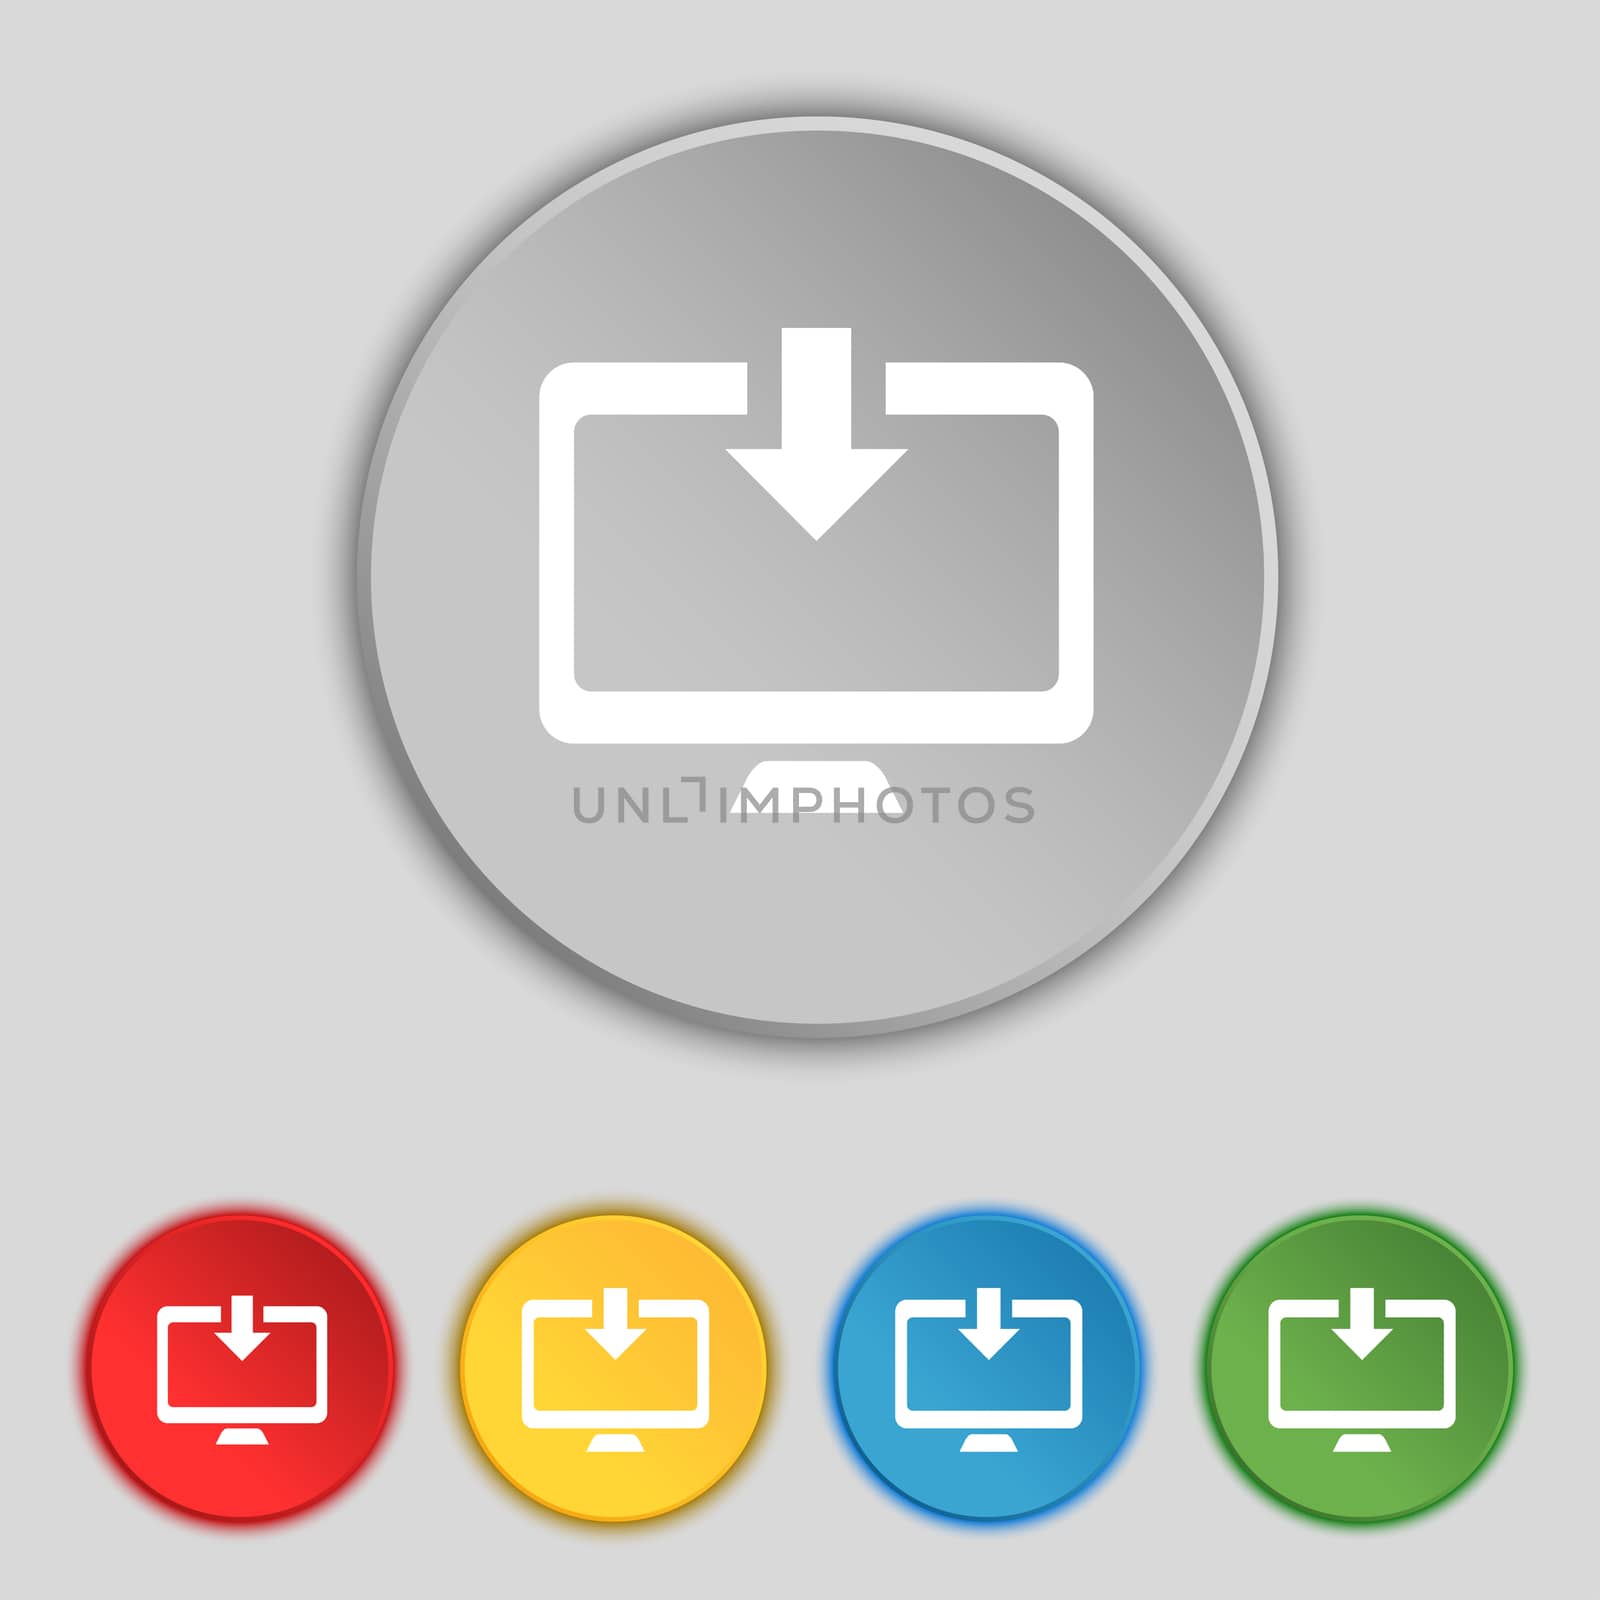 Download, Load, Backup icon sign. Symbol on five flat buttons. illustration